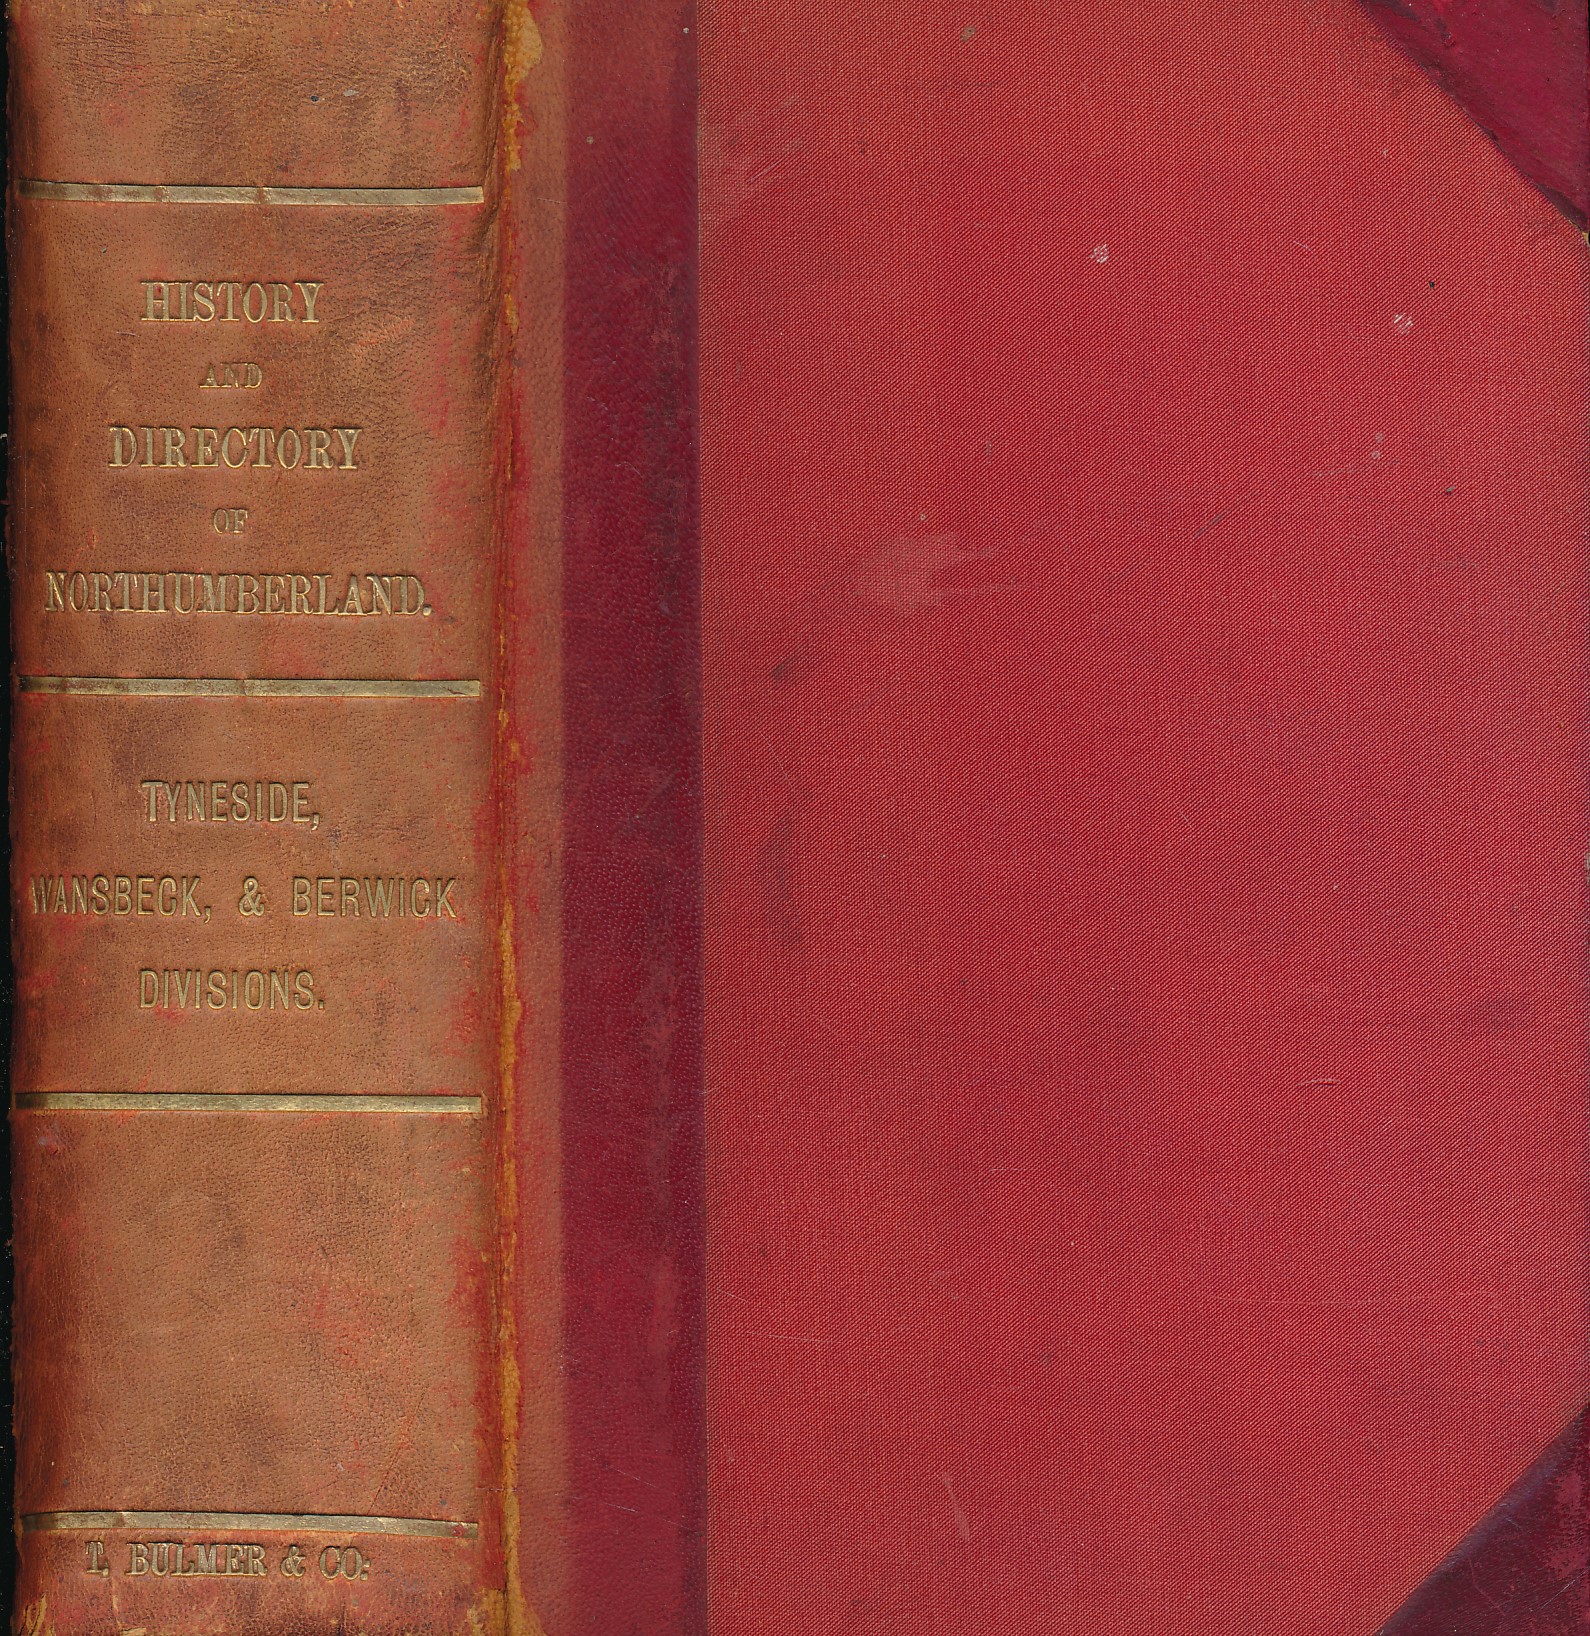 History, Topography, and Directory of Northumberland 1887. Tyneside, Wansbeck, & Berwick Divisions